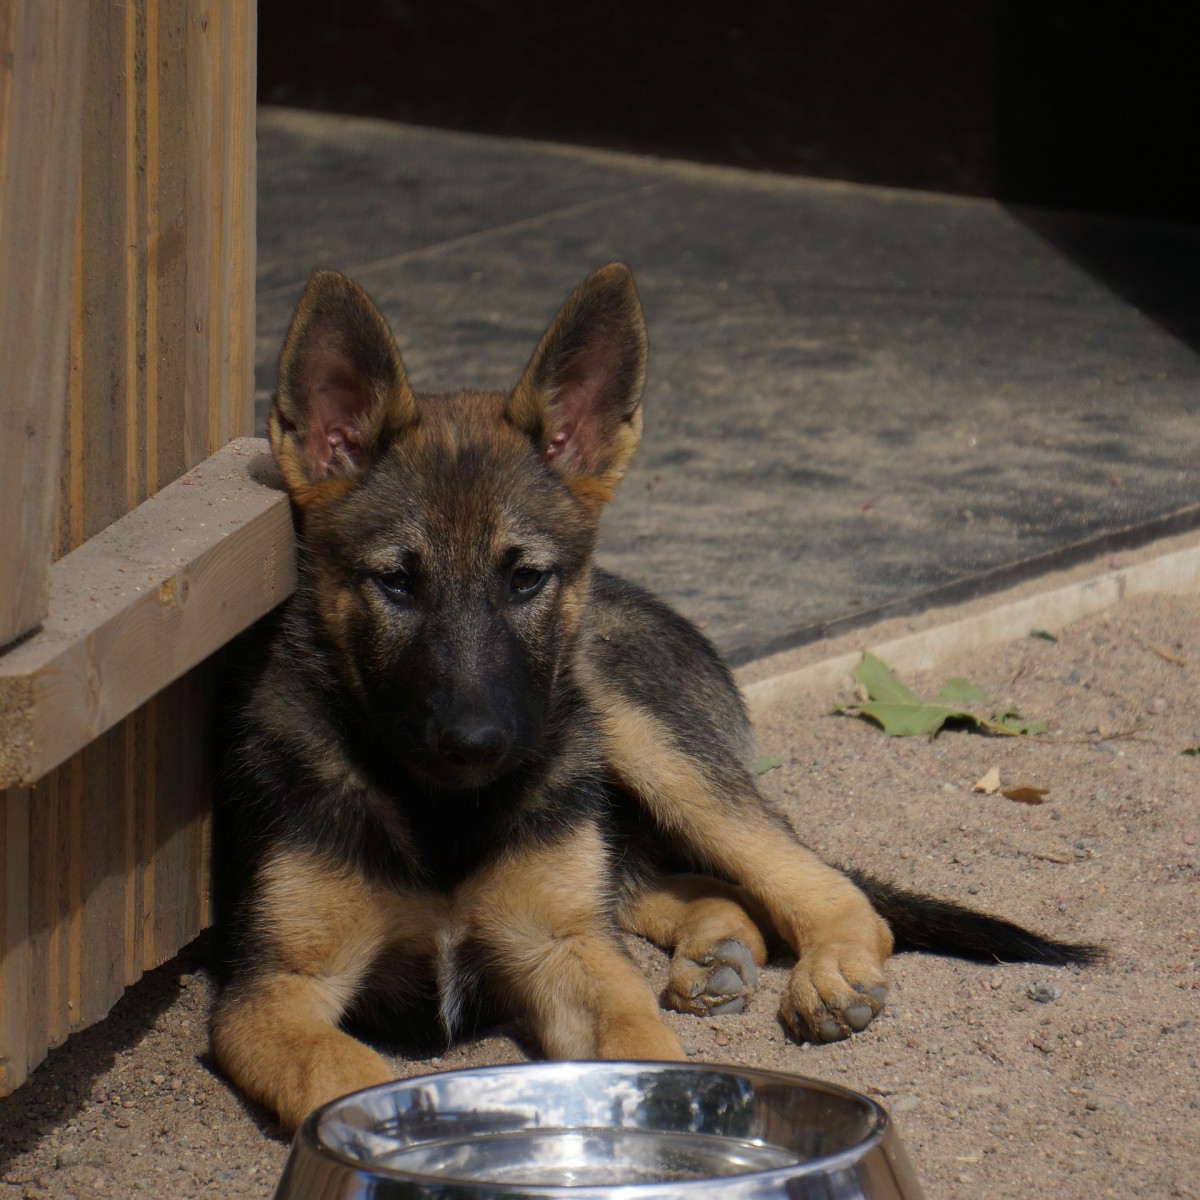 What makes a water bowl good for your dog?